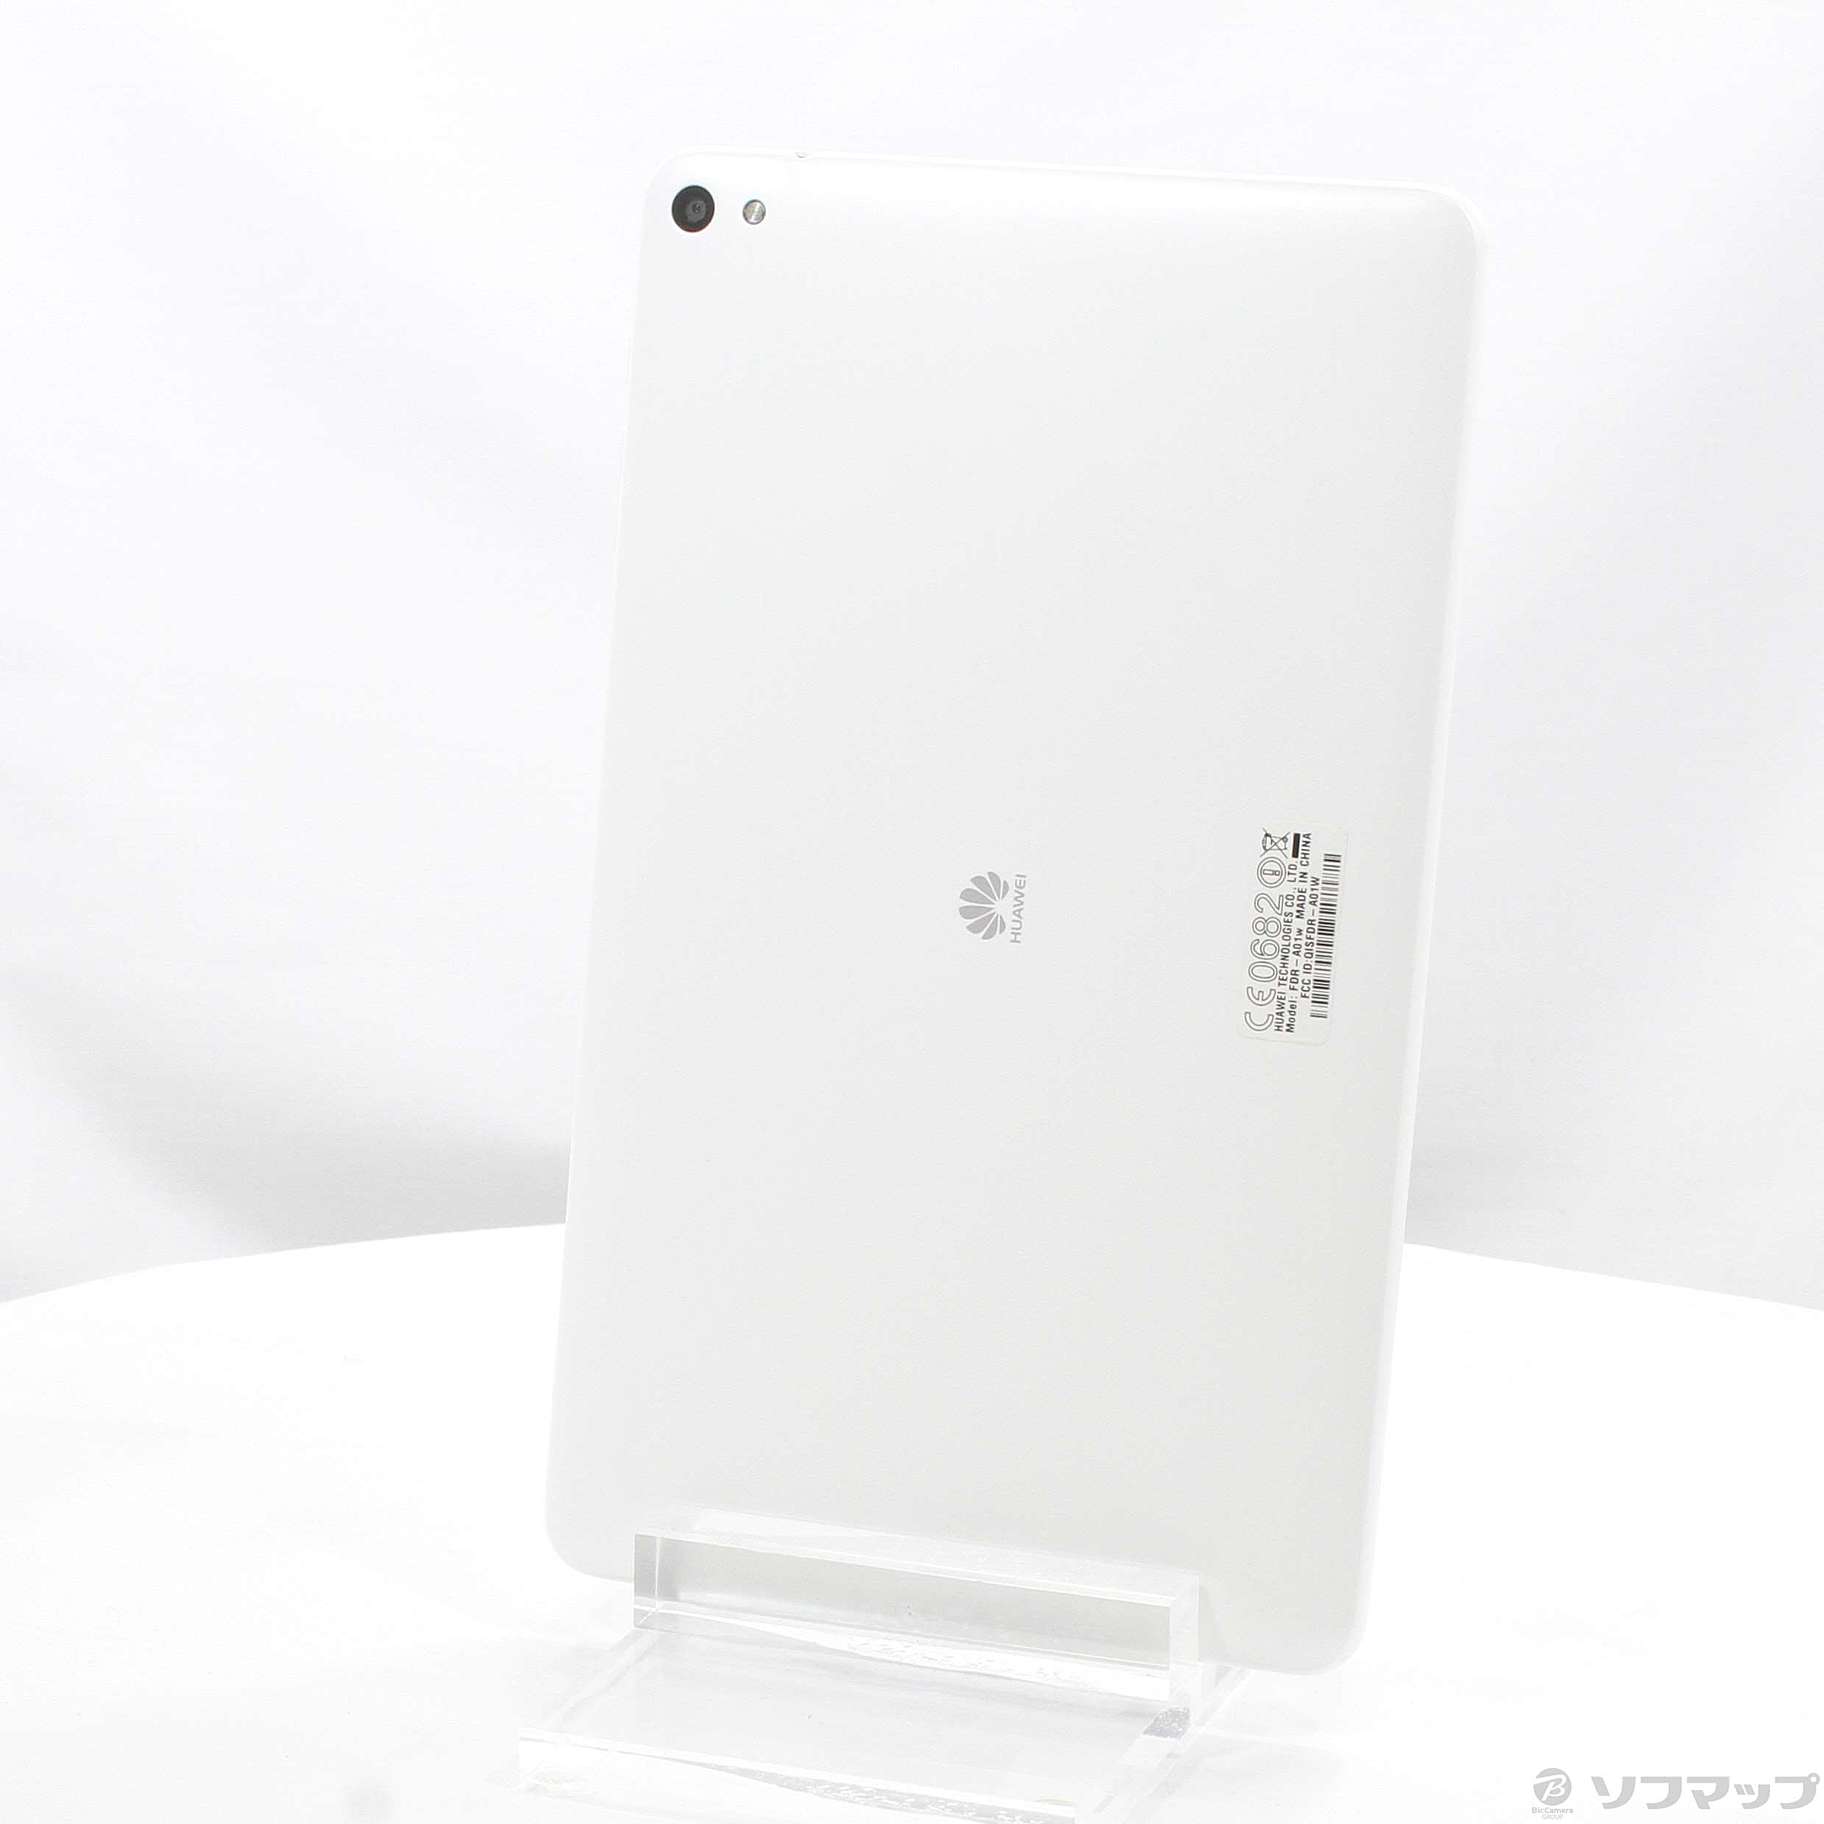 PC/タブレットHuawei 10.1型 タブレットMediaPad T2  FDR-A01W